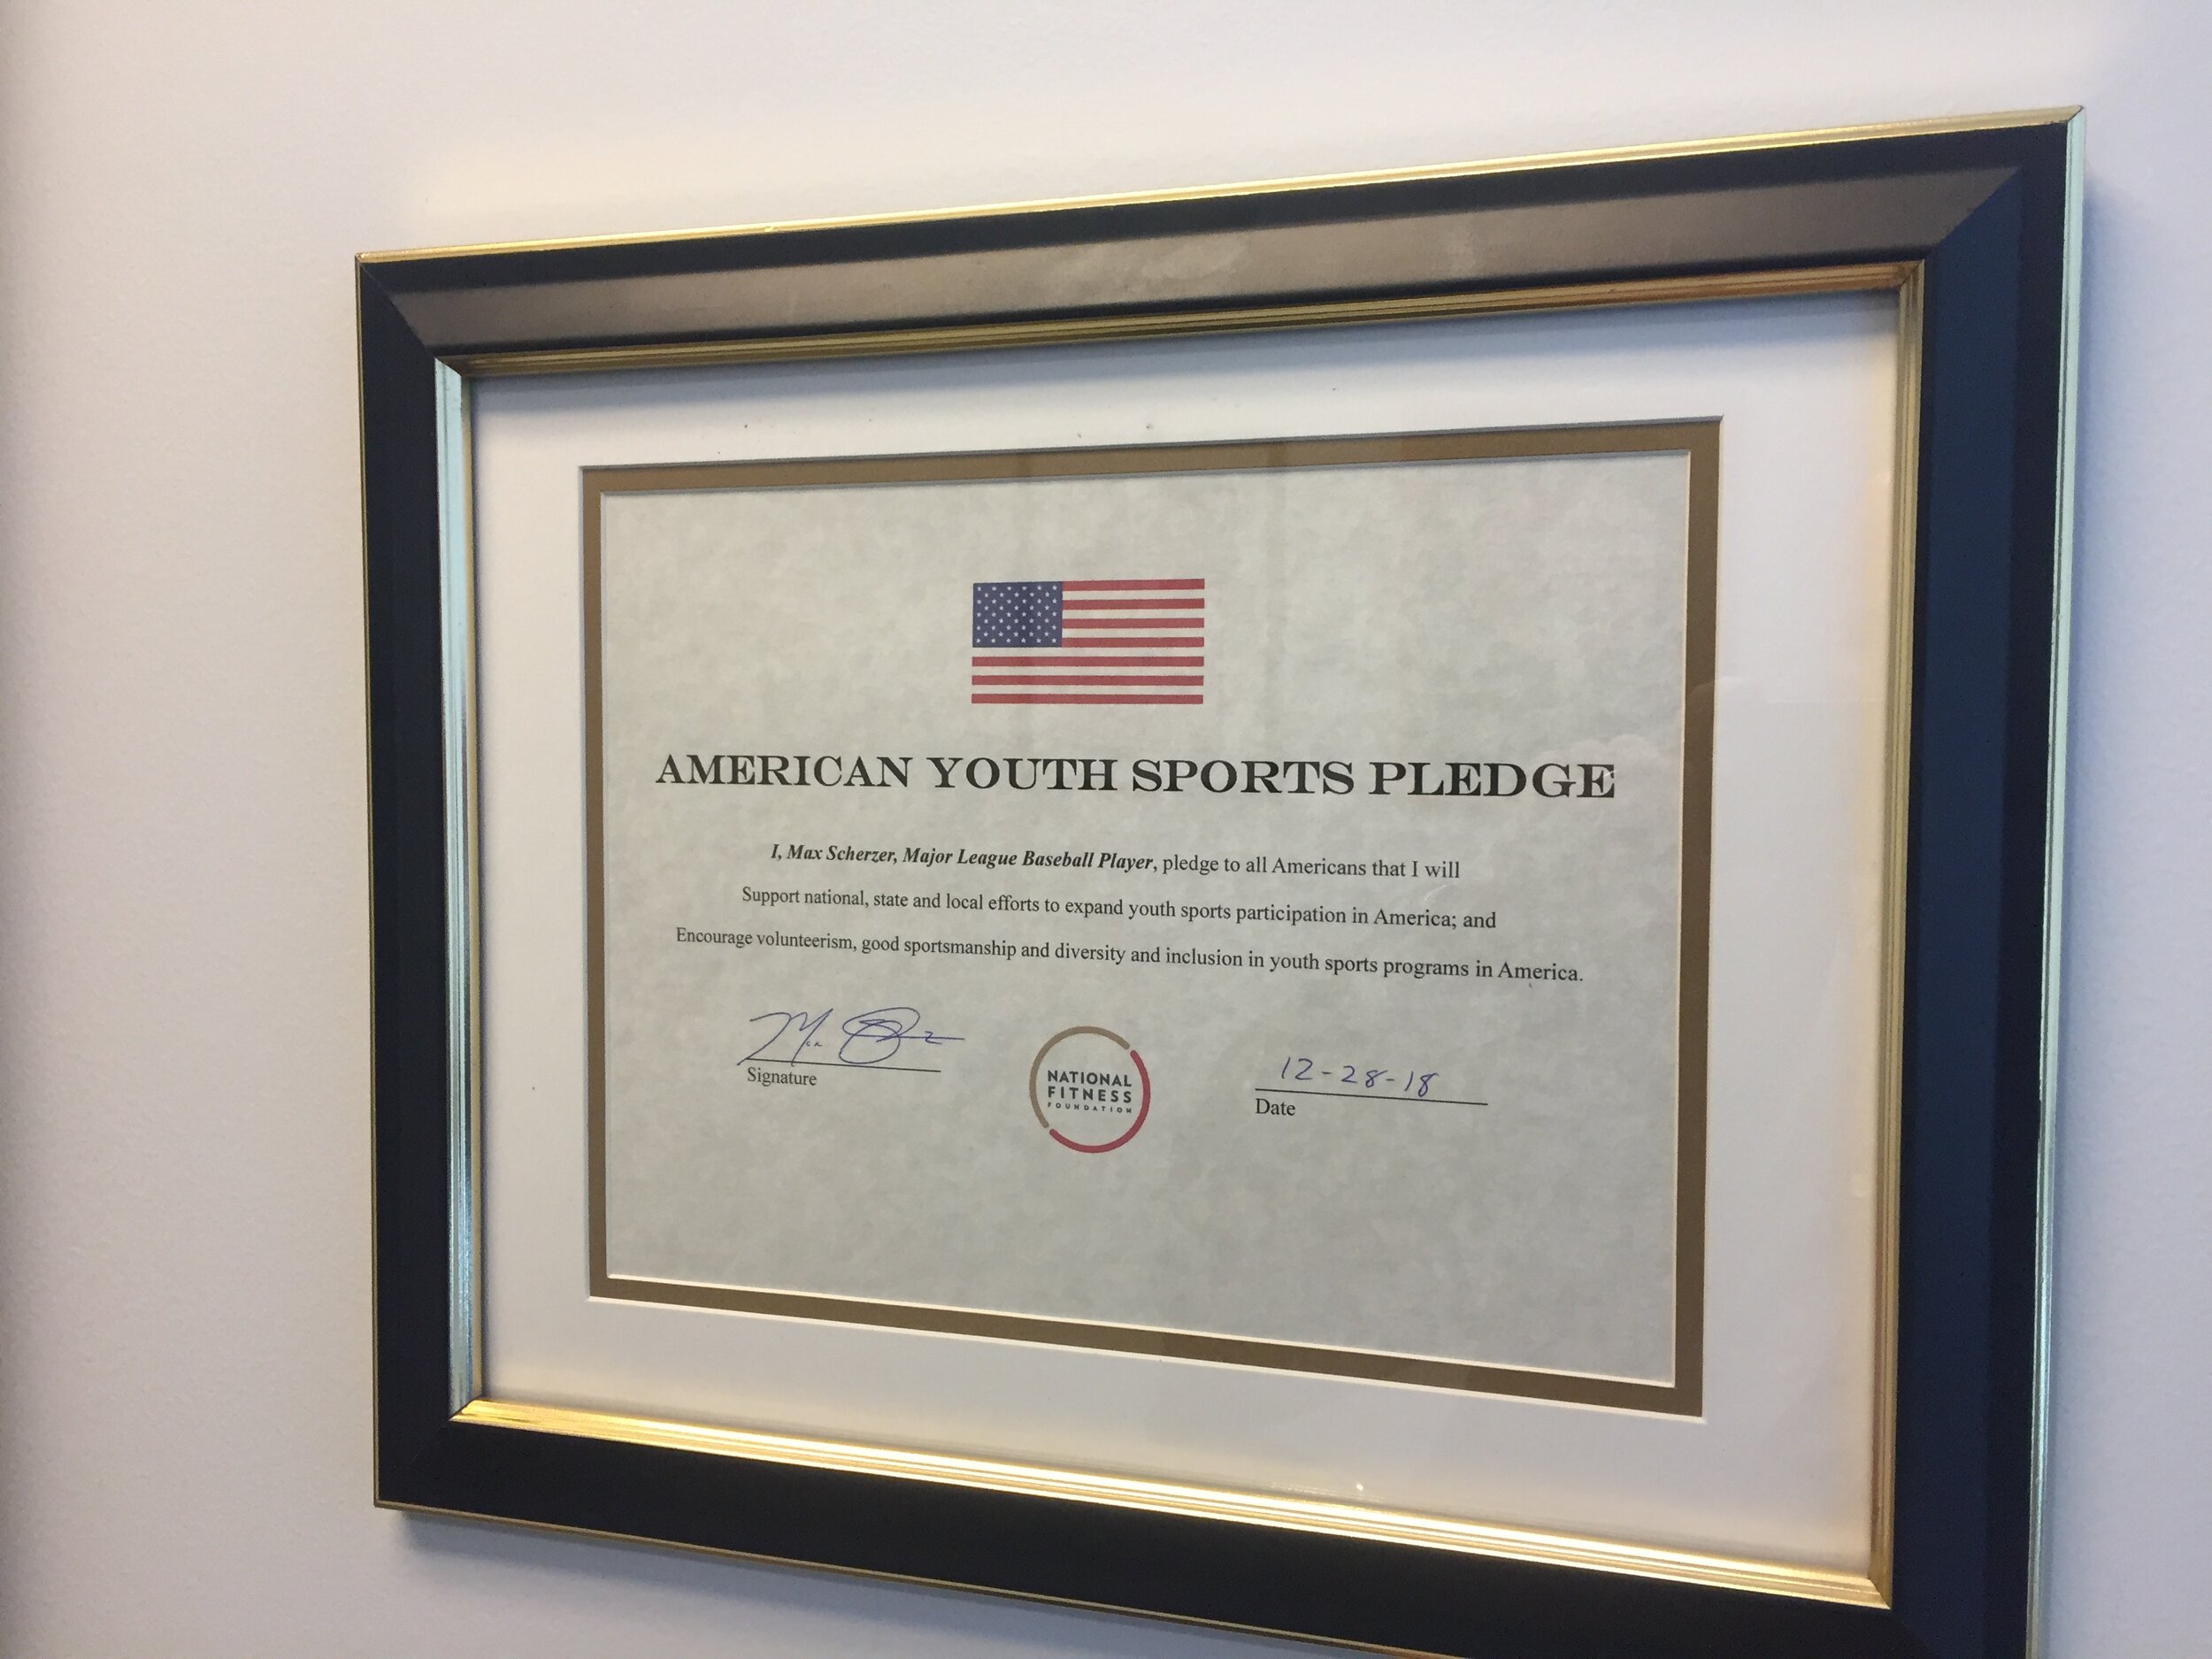  Washington Nationals starting pitcher, Max Scherzer’s American Youth Sports Pledge hangs in the National Fitness Foundation Office. 